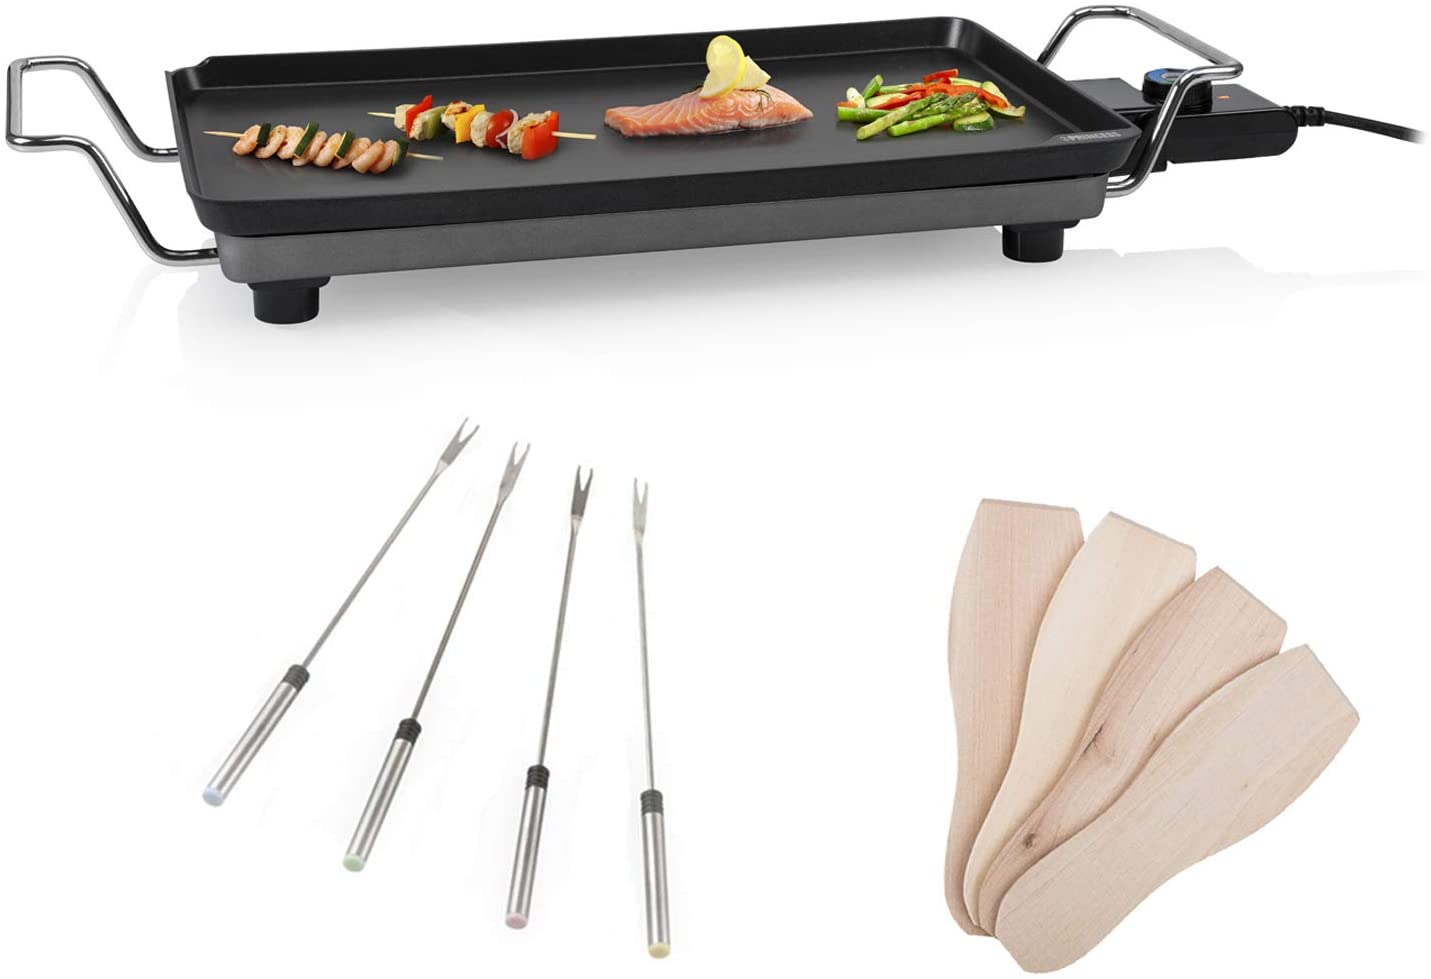 Princess Fun Cooking Teppanyaki Electric Barbecue with 4 Teppan Yaki Forks, Frying Surface 46 x 26 cm, Japanese Indoor Table Grill, 2500 Watt